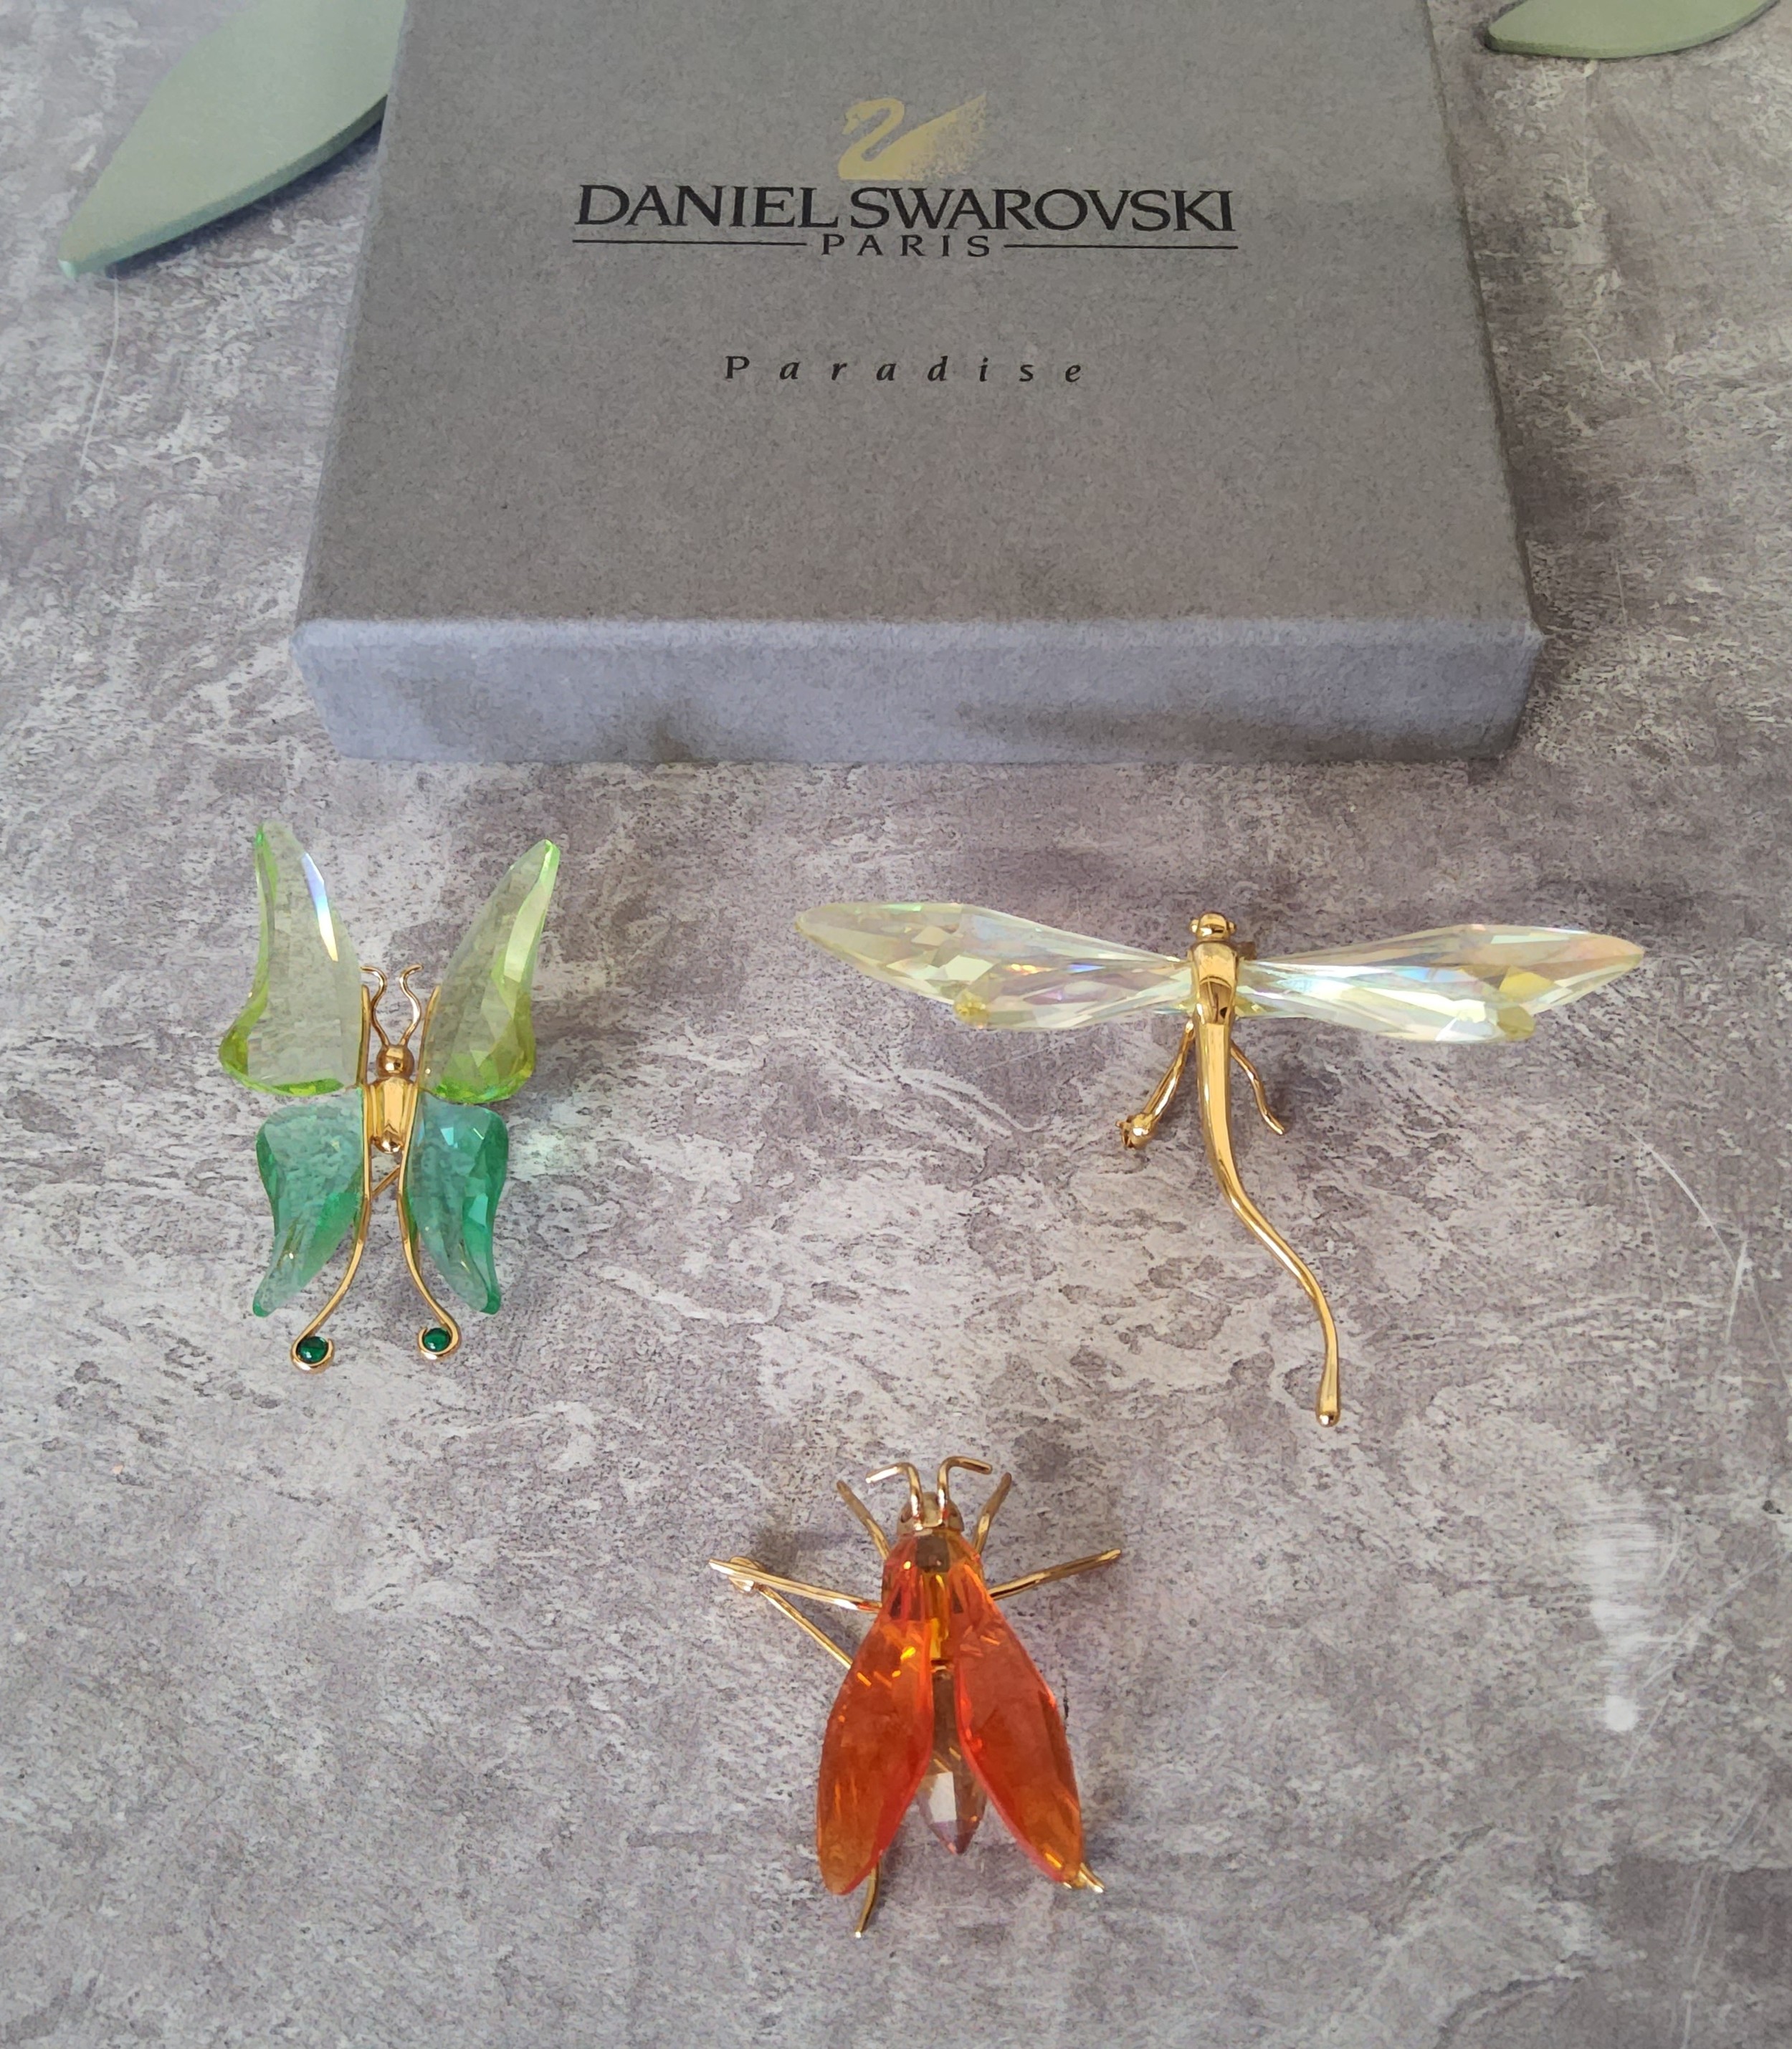 Daniel Swarovski Paradise collection including gold plated sterling silver crickets, dragonflies, - Image 2 of 6